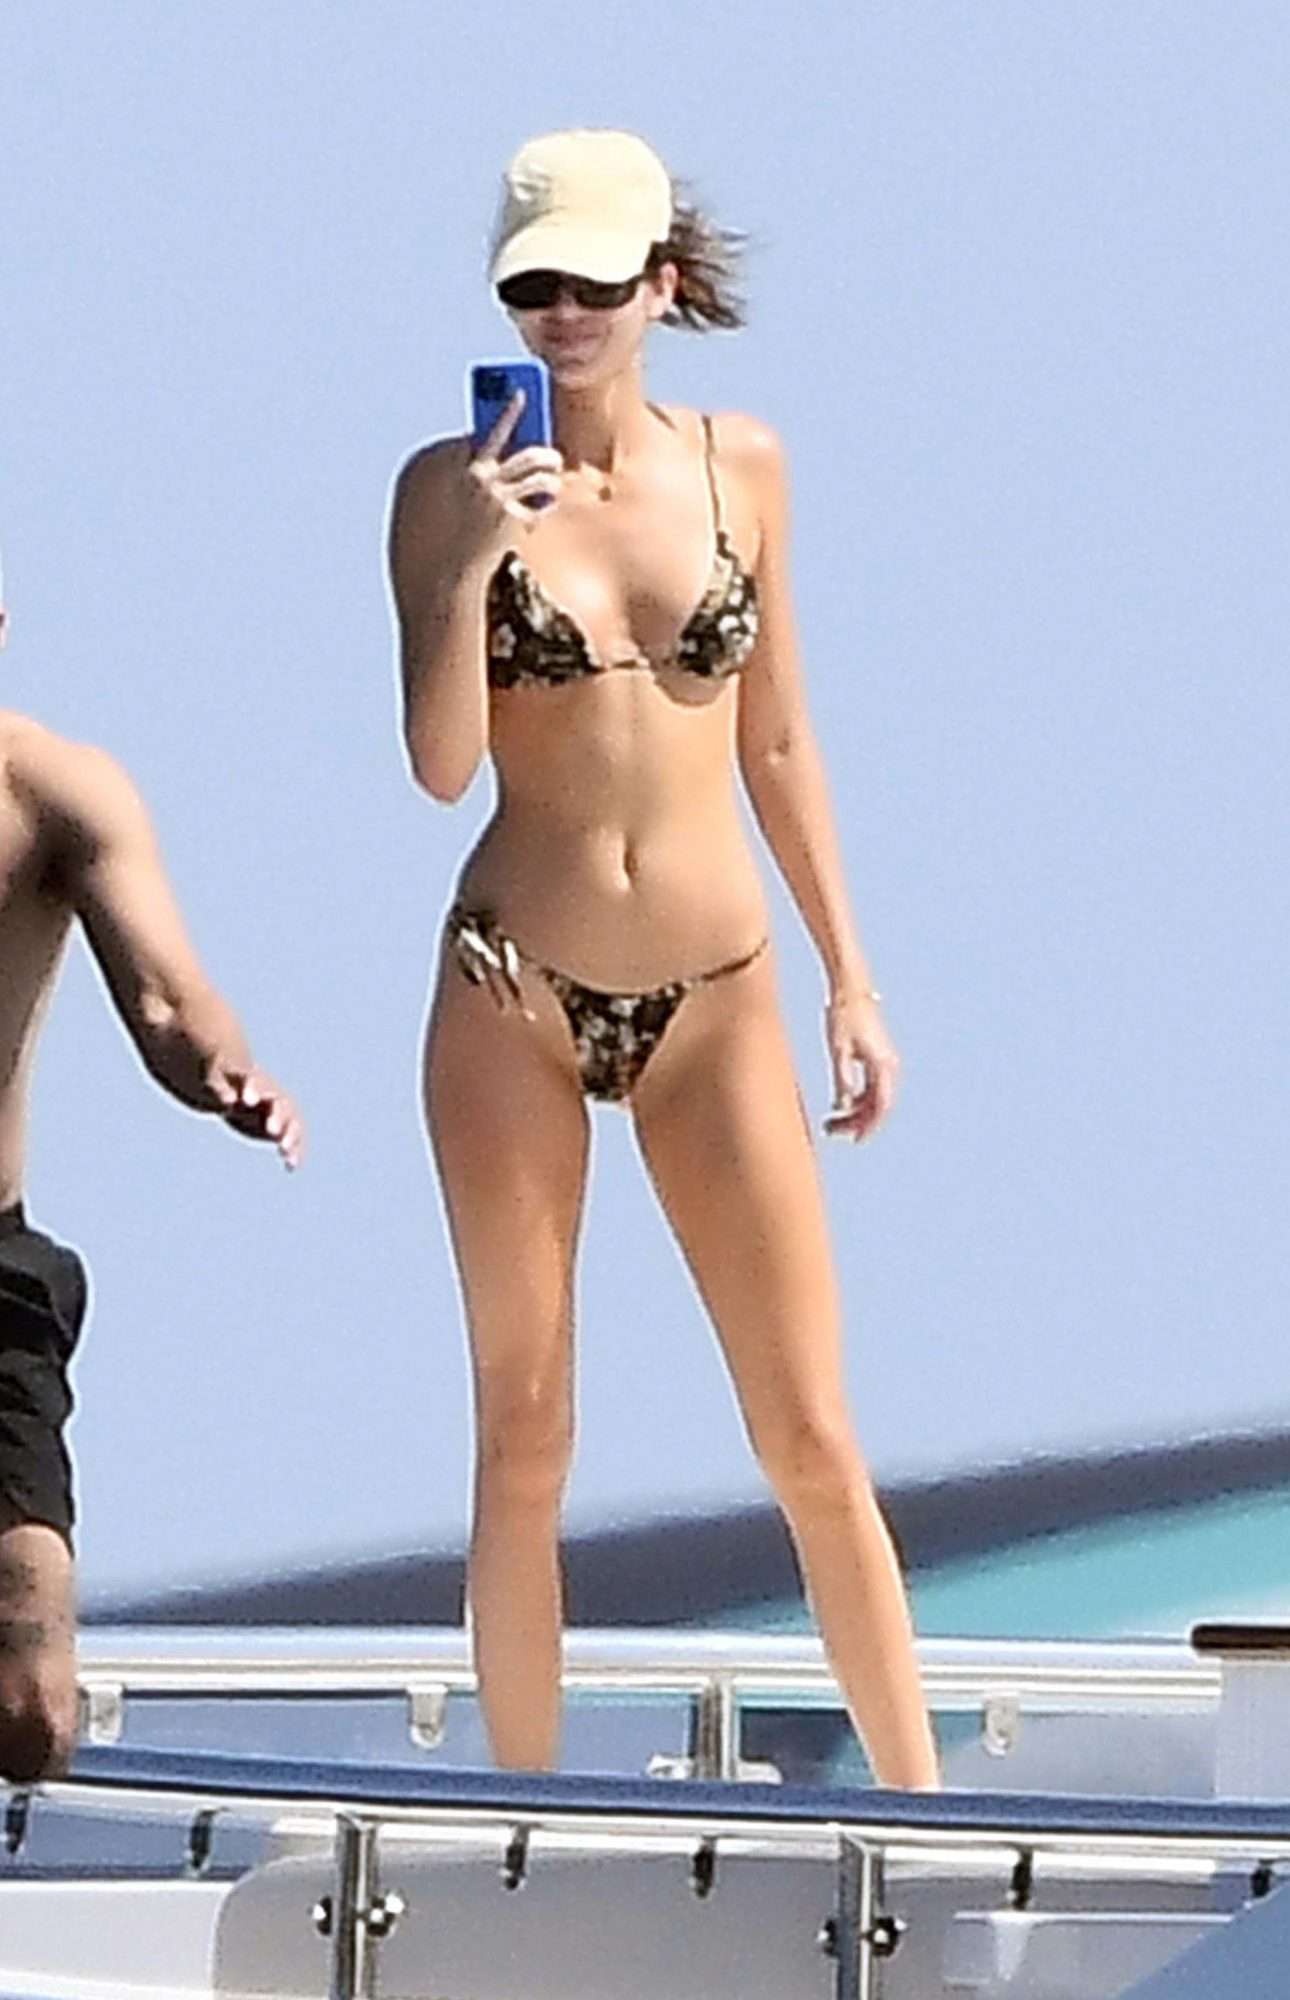 Kendall Jenner Shows Off Her Supermodel Figure In A Tiny Bikini On A Yacht With Beau Devin Booker